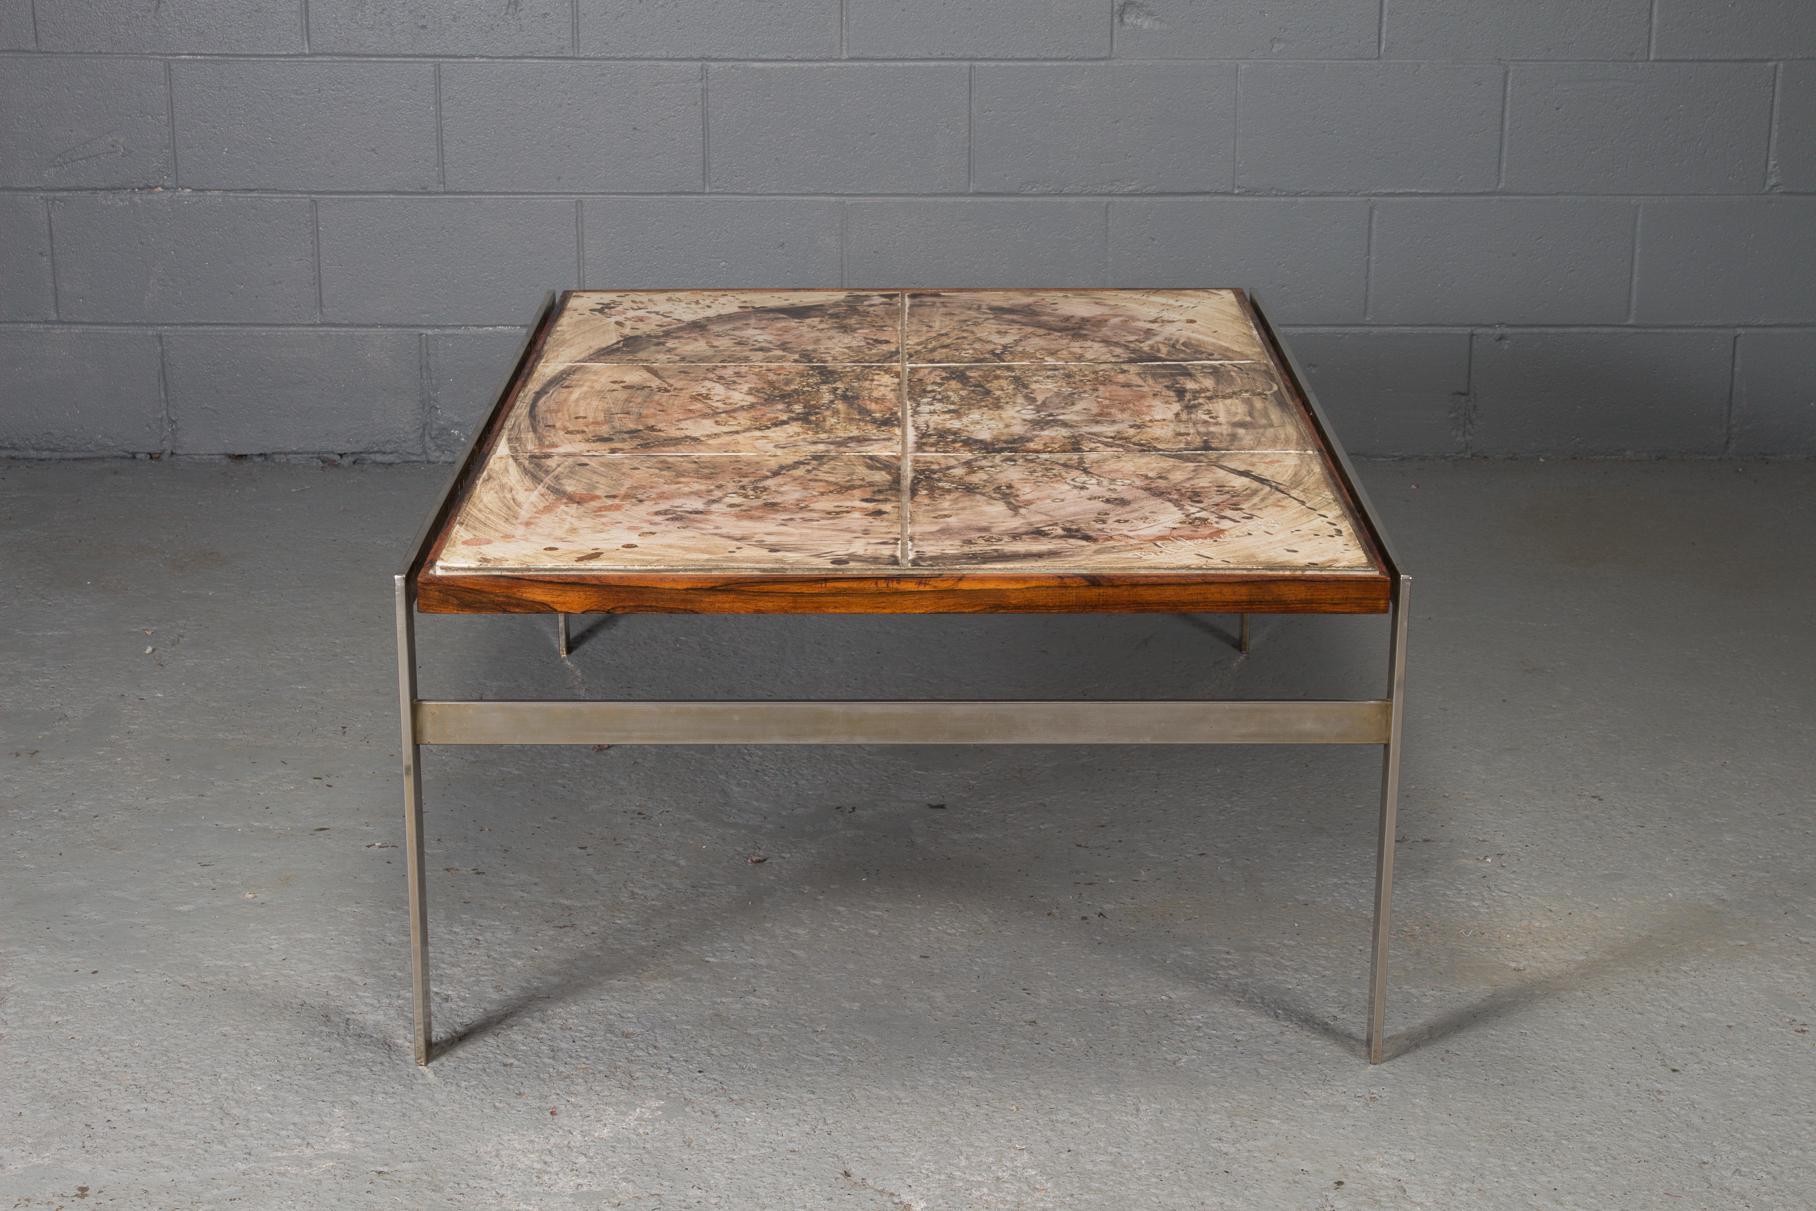 This coffee table is made of hand-painted tile with a rosewood and chrome frame. The piece features a signature indicating it was created in 1973.